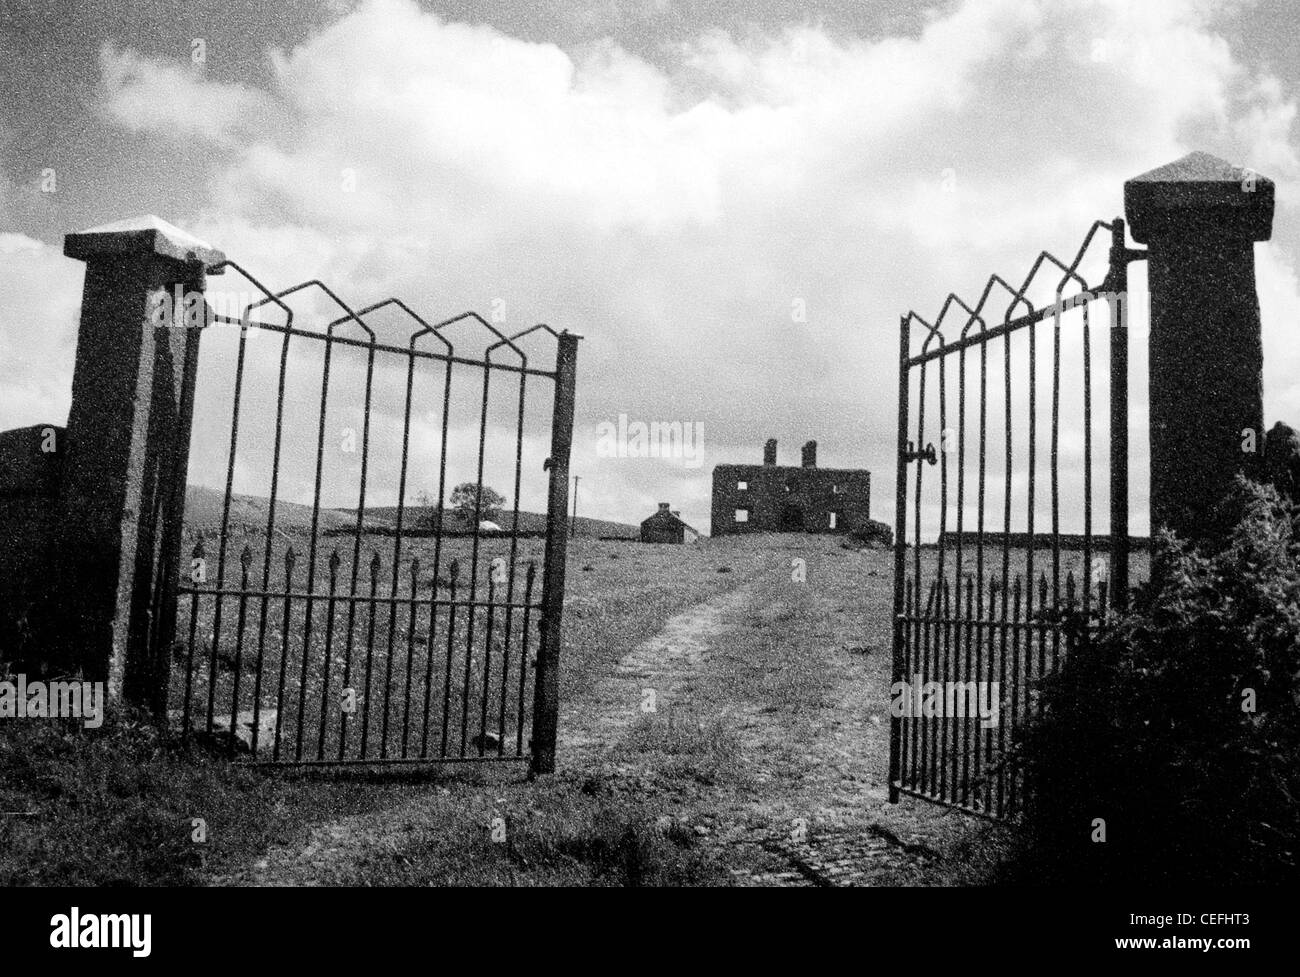 Co Clae Ireland - An open gate and a lane way leading to a ruined house Stock Photo